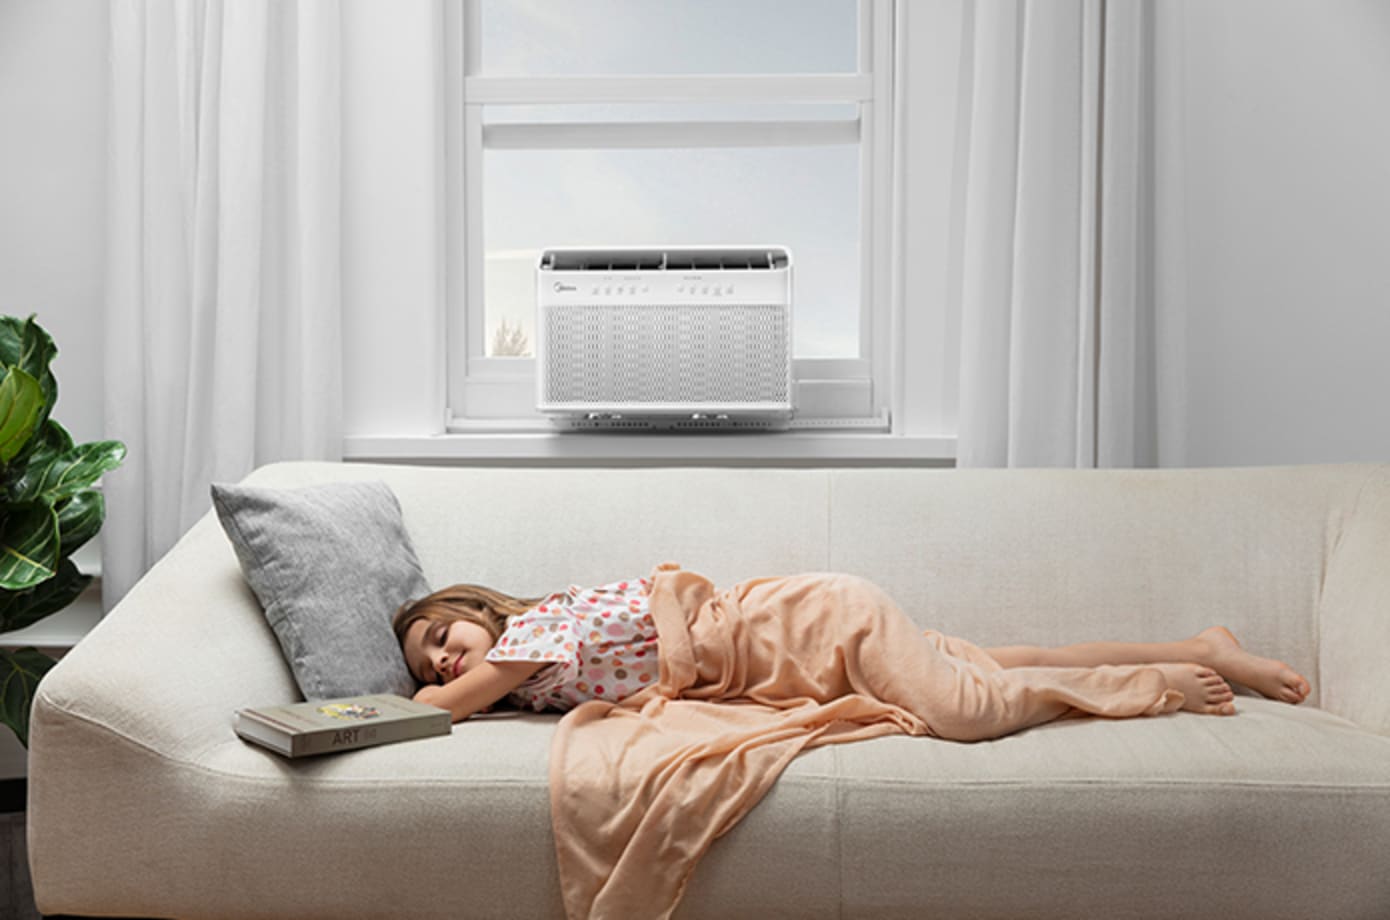 Midea 12,000 BTU Smart Inverter U-Shaped Window Air Conditioner, 35% Energy Savings, Extreme Quiet, Covers up to 550 Sq. ft., MAW12V1QWT - image 6 of 18